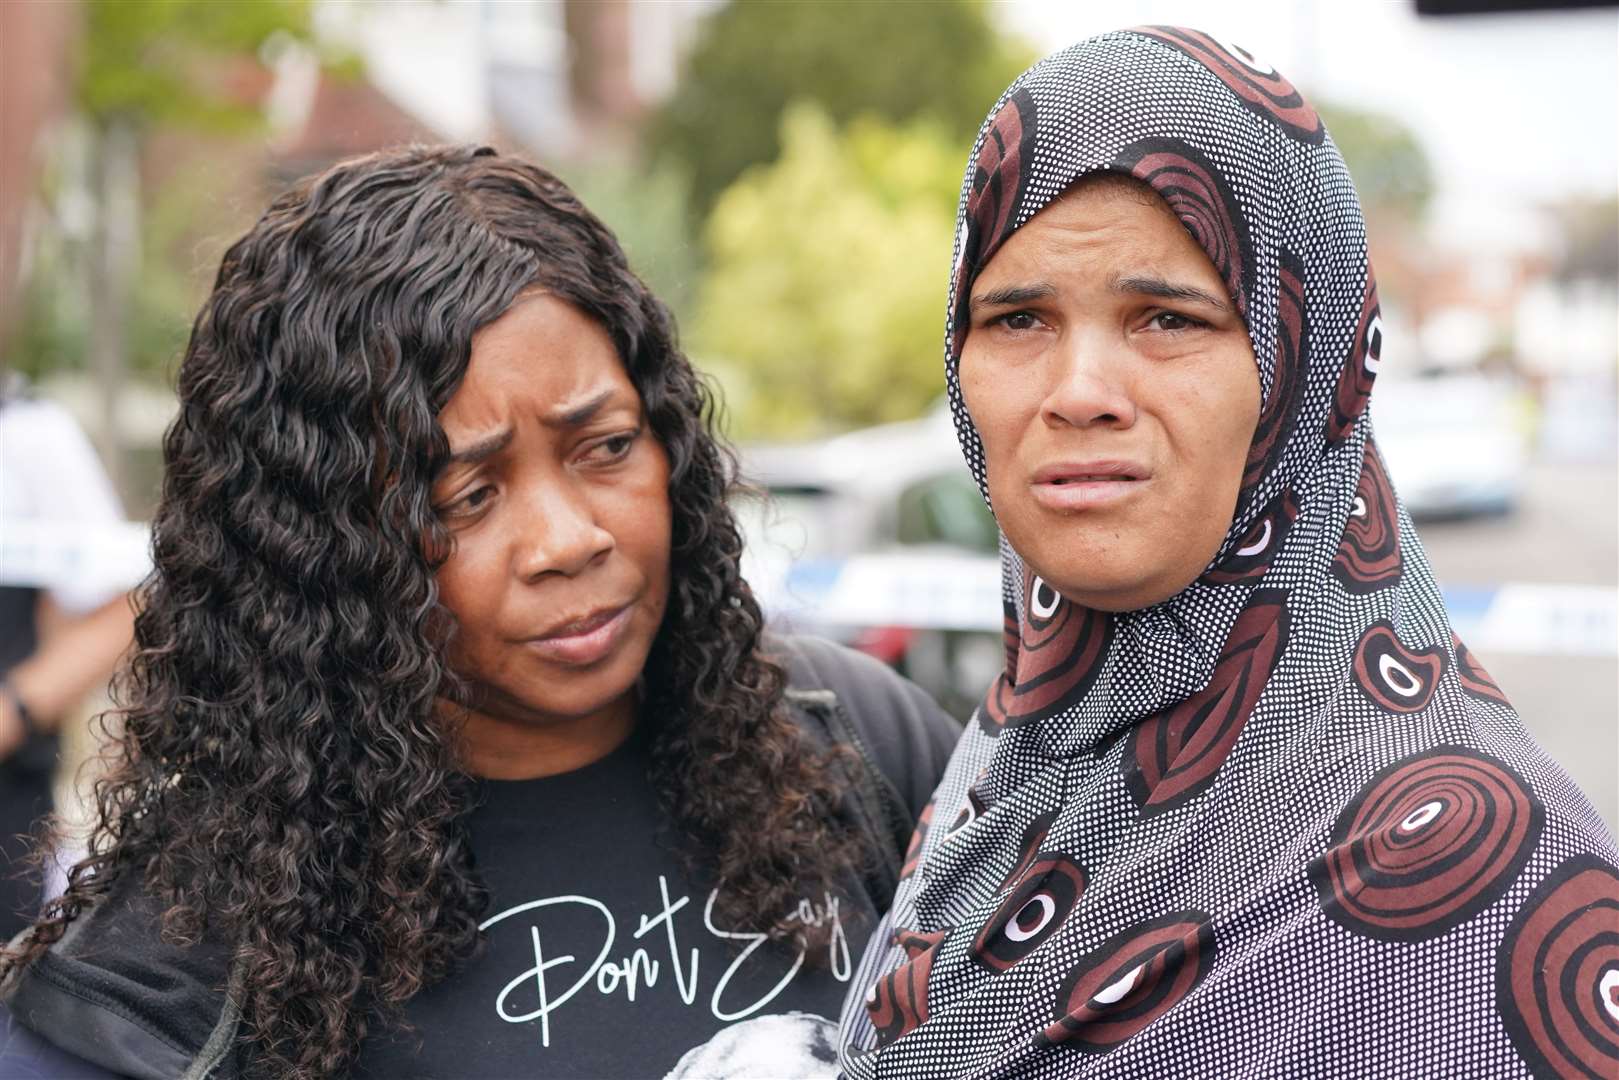 Pastoress Lorraine Jones with Kimberly Alleyne (right), 49, who said her daughter was the fiancee of the man shot in Streatham Hill (Jonathan Brady/PA)